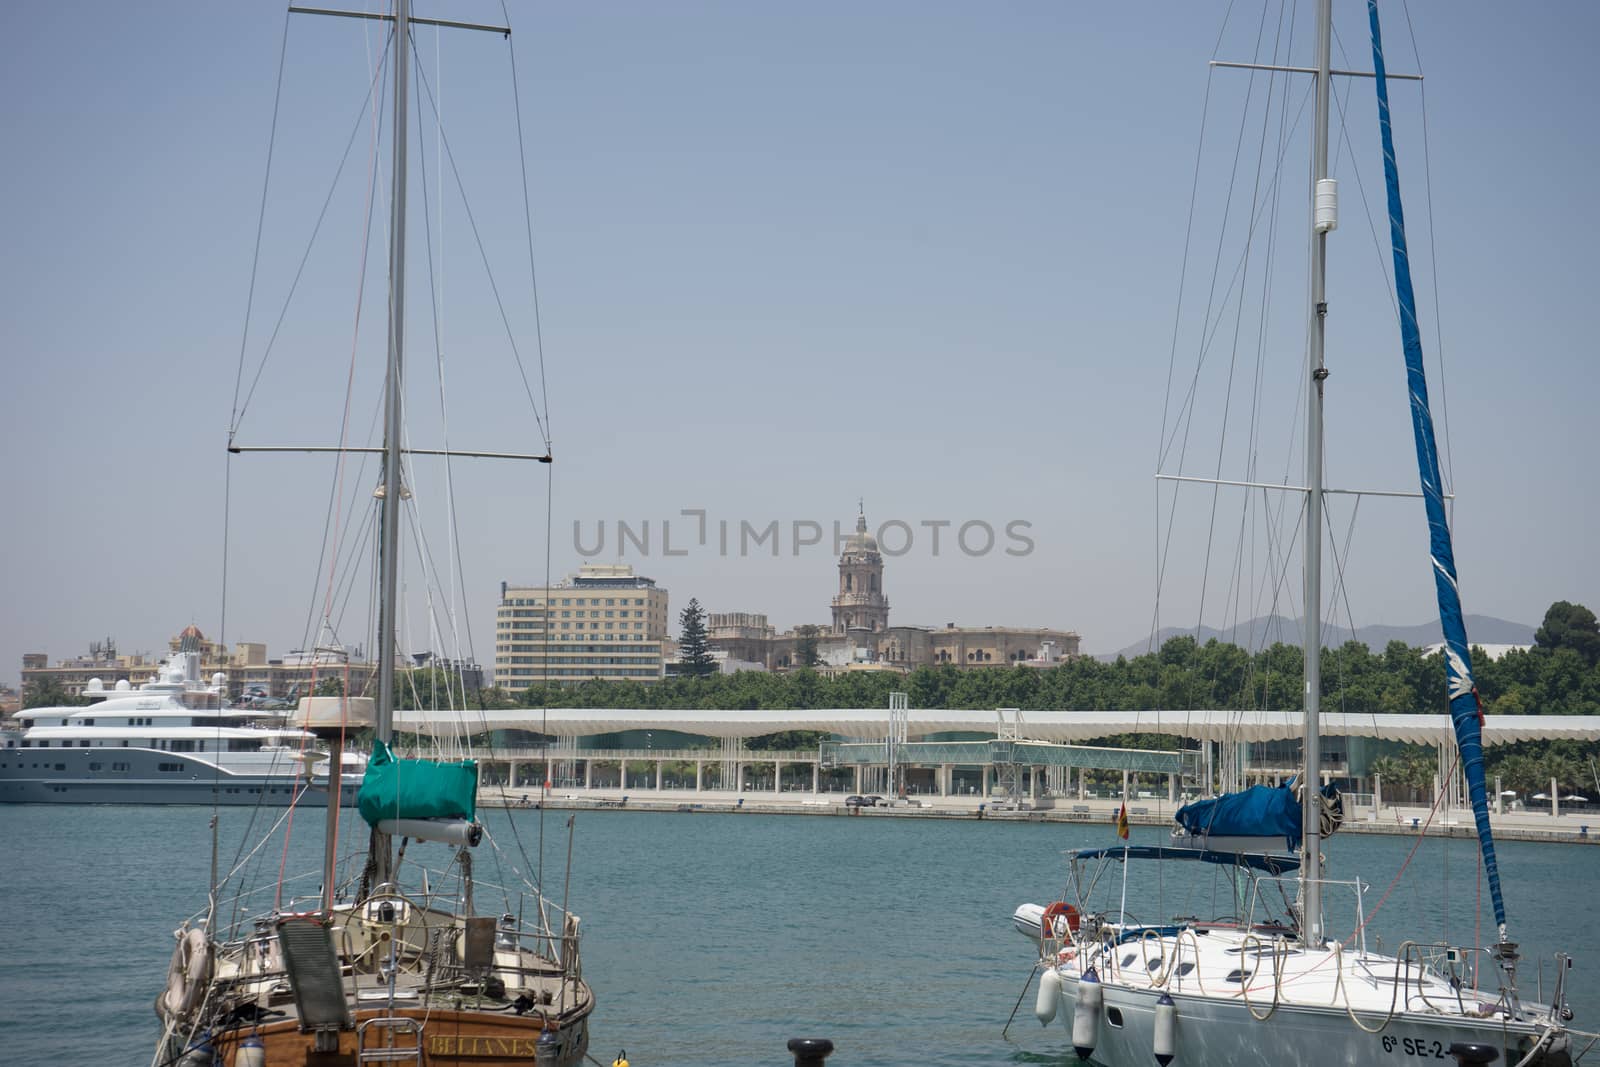 Boats with their sails down docking at the harbour in Malaga, Spain, Europe on a summer day with clear skies